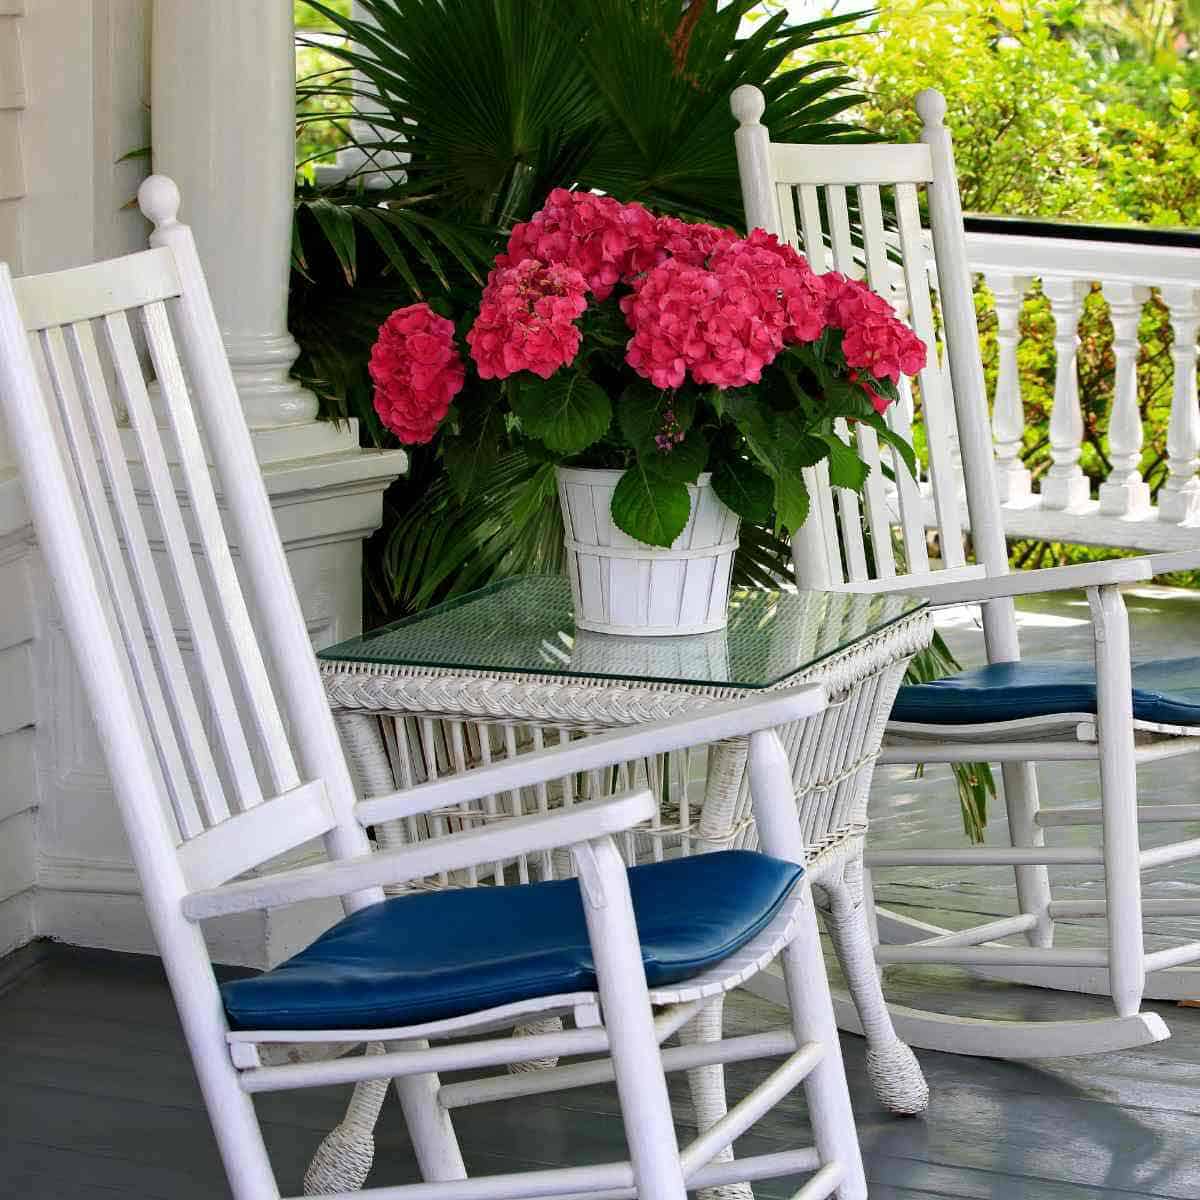 Two rocking chairs on a front porch.